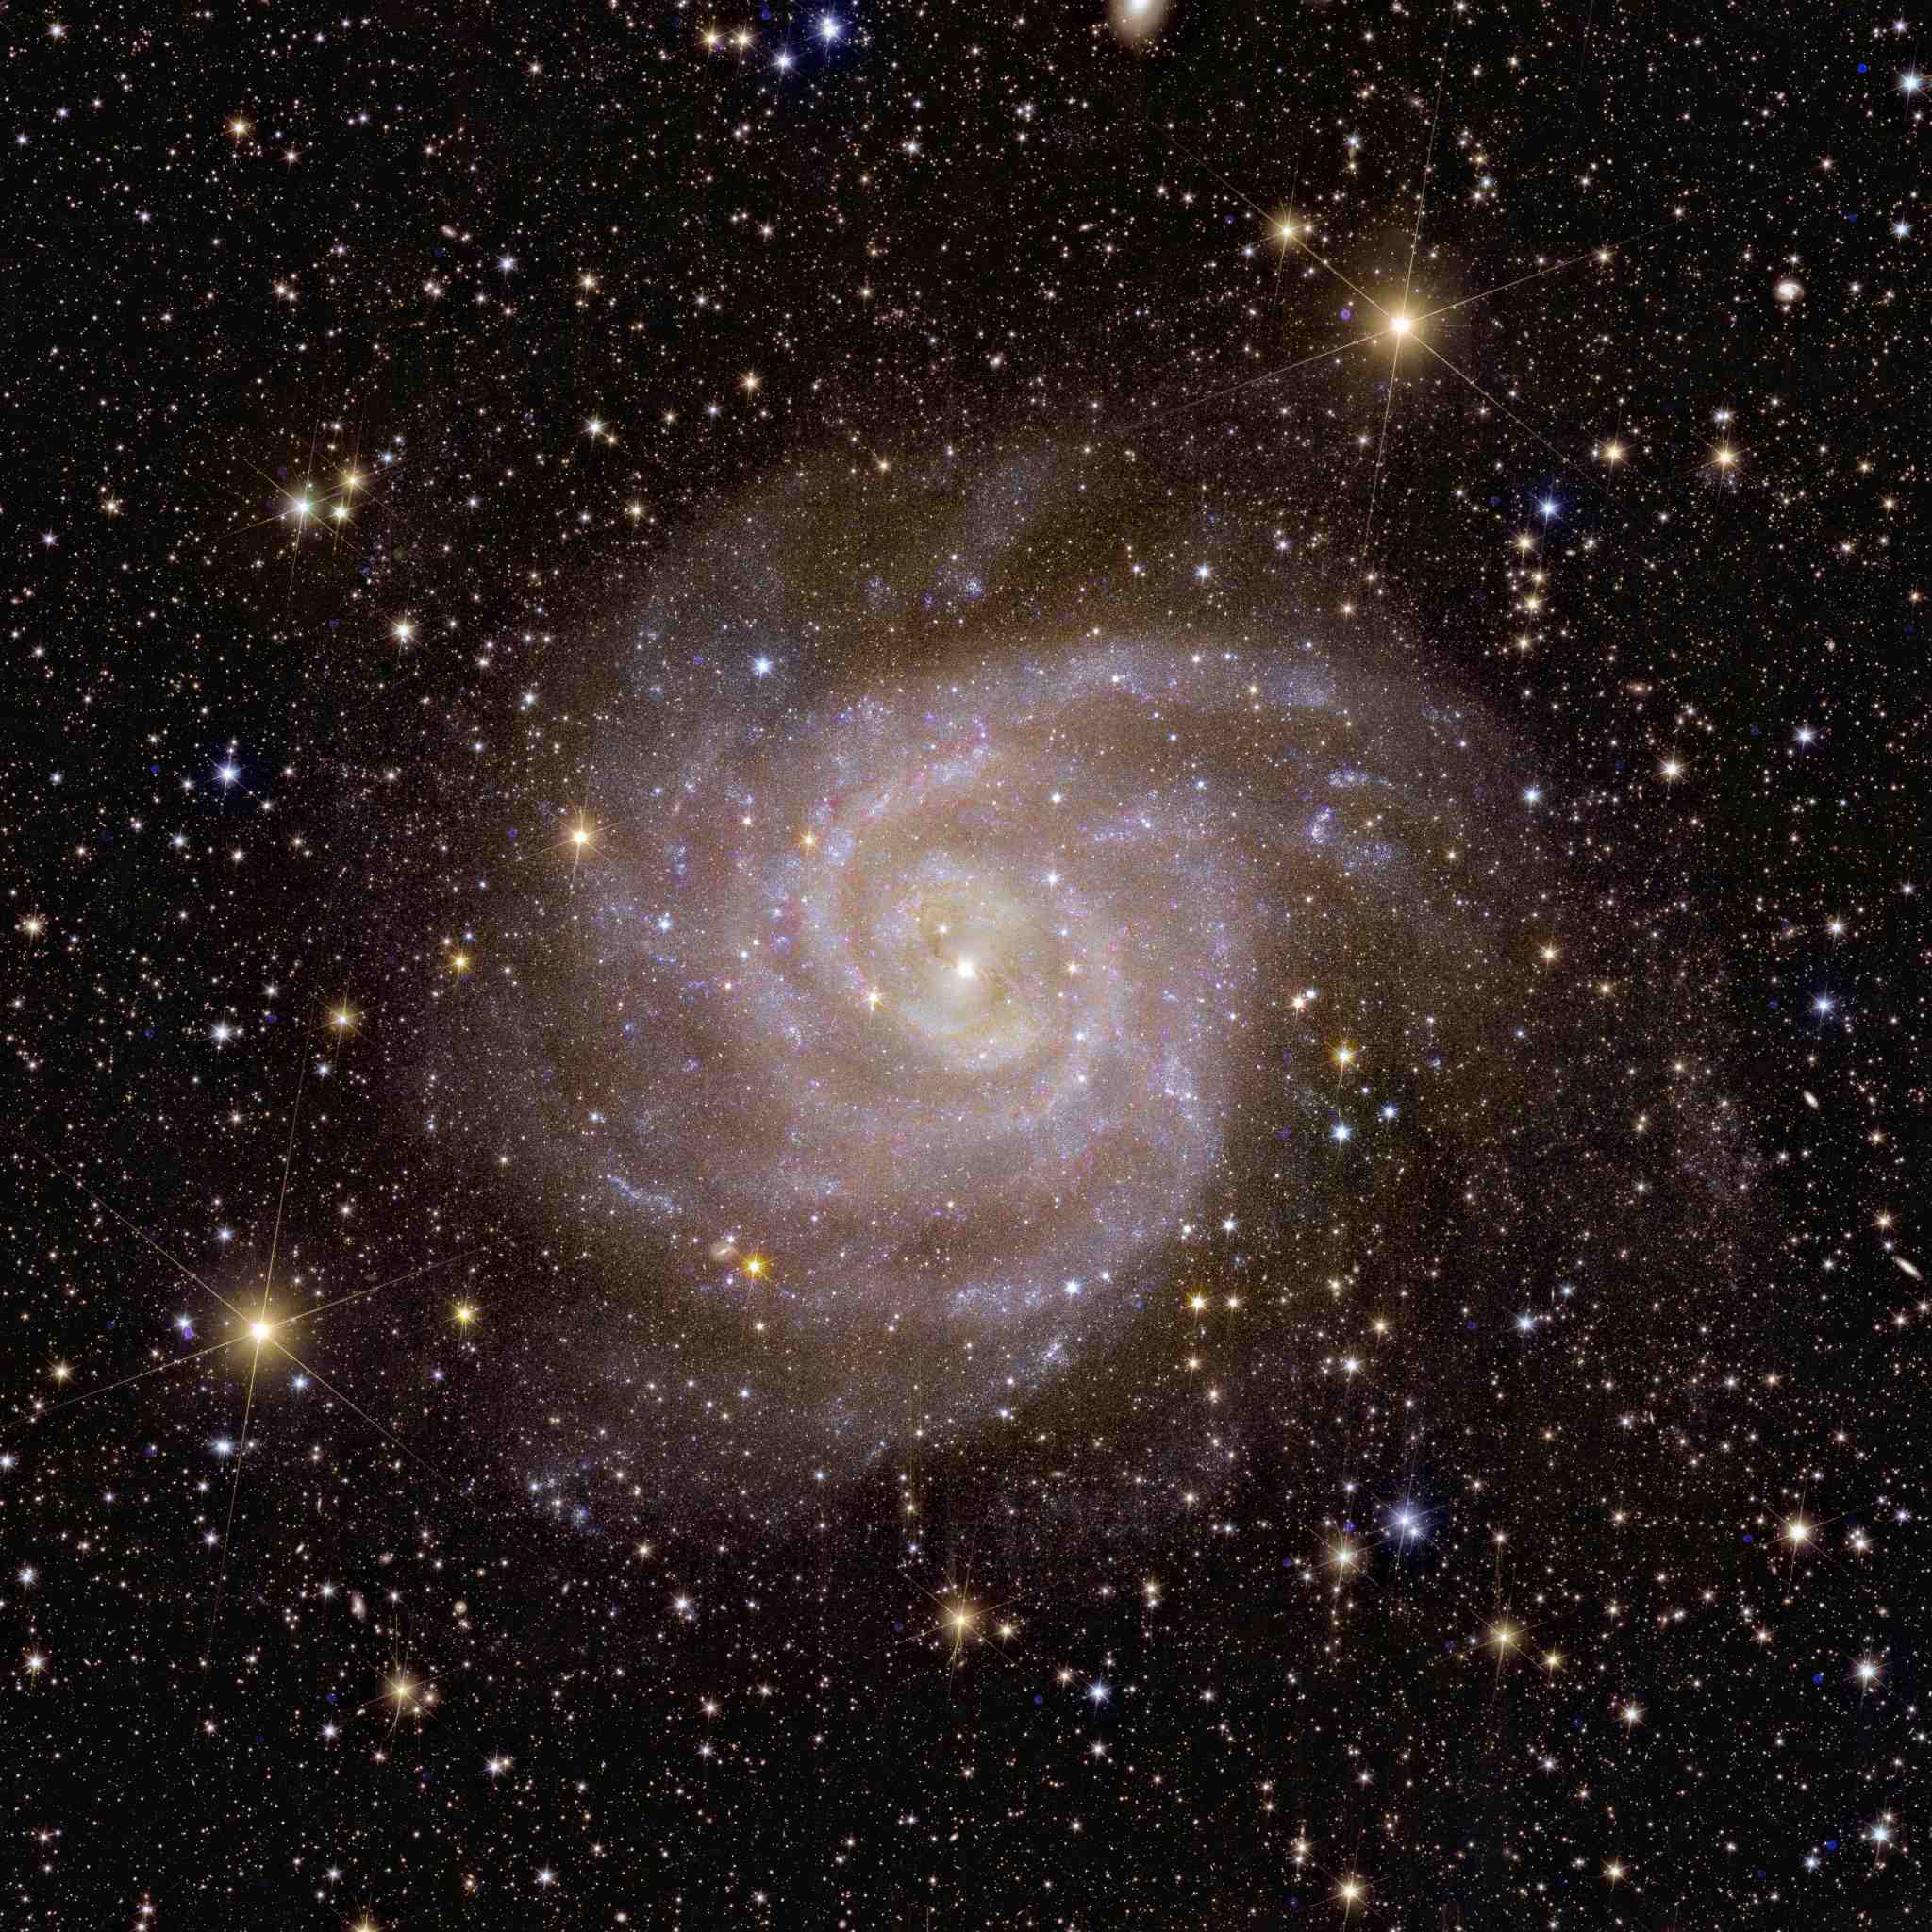 A big spiral galaxy is visible face-on in white/pink colours at the centre of this square astronomical image. The galaxy covers almost the entire image and appears whiter at its centre where more stars are located. Its spiral arms stretch out across the image and appear fainter at the edges. The entire image is speckled with stars ranging in colour from blue to white to yellow/red, across a black background of space. Blue stars are younger and red stars are older. A few of the stars are a bit larger than the rest, with six diffraction spikes.